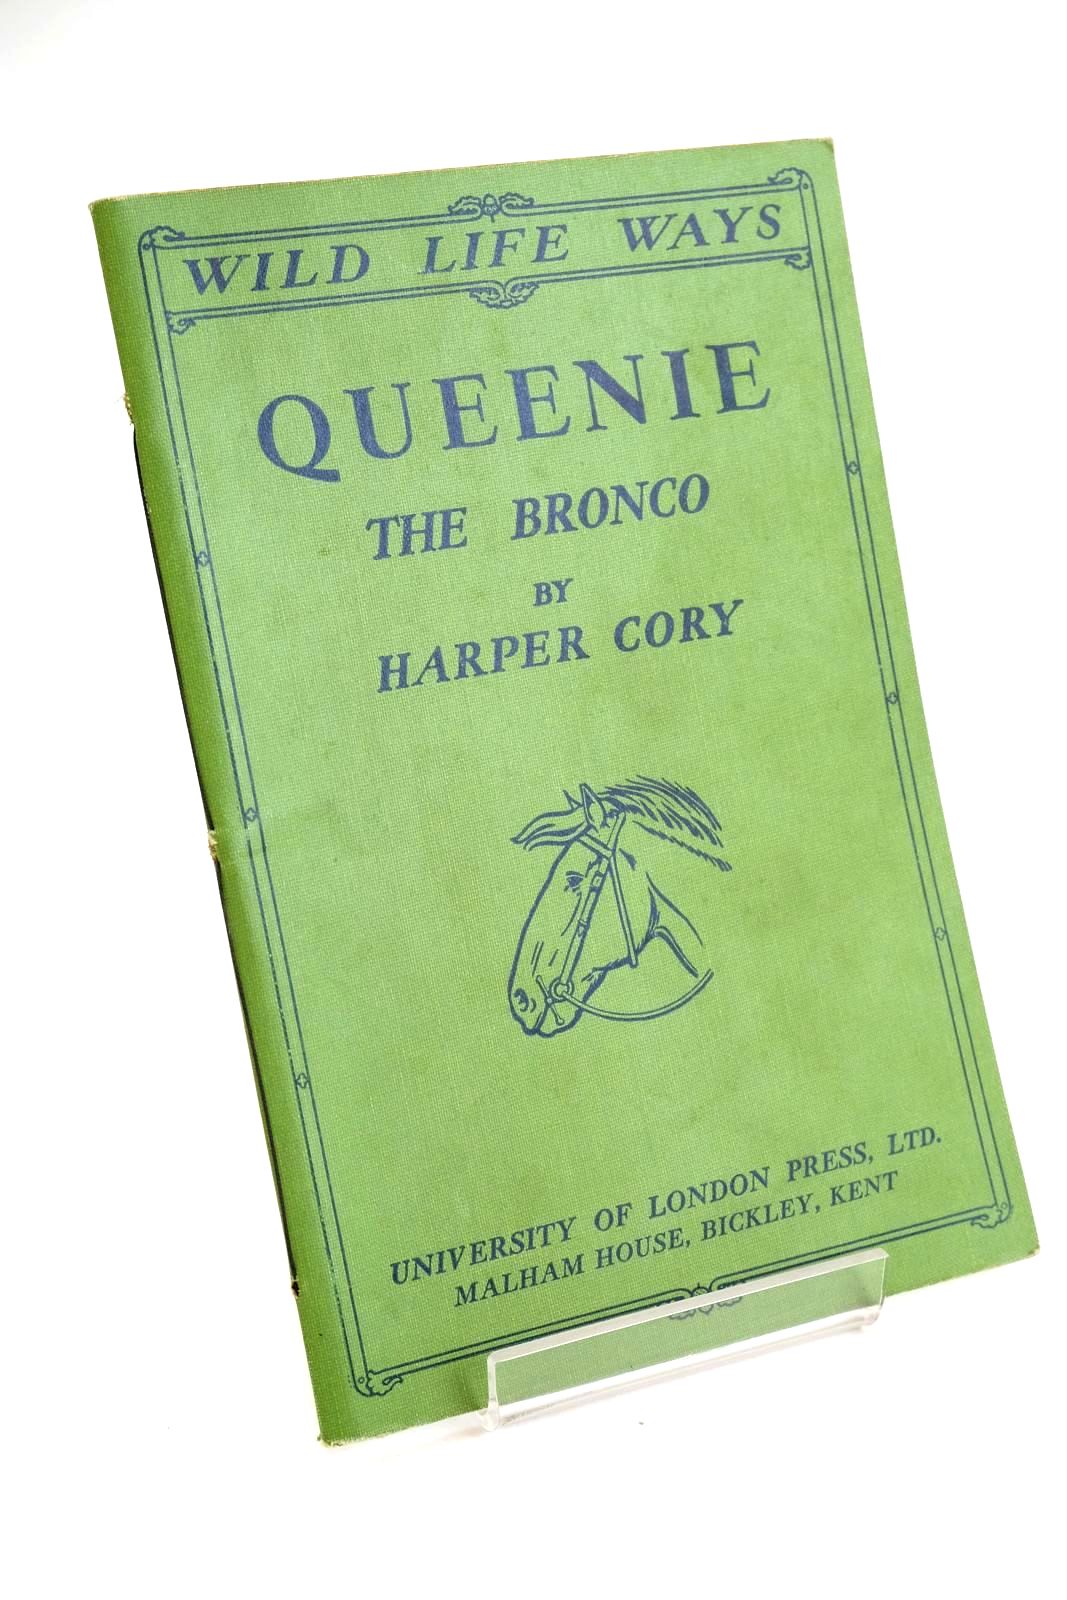 Photo of QUEENIE THE BRONCO written by Cory, Harper illustrated by Parker, W.N. published by University of London Press Ltd. (STOCK CODE: 1328050)  for sale by Stella & Rose's Books